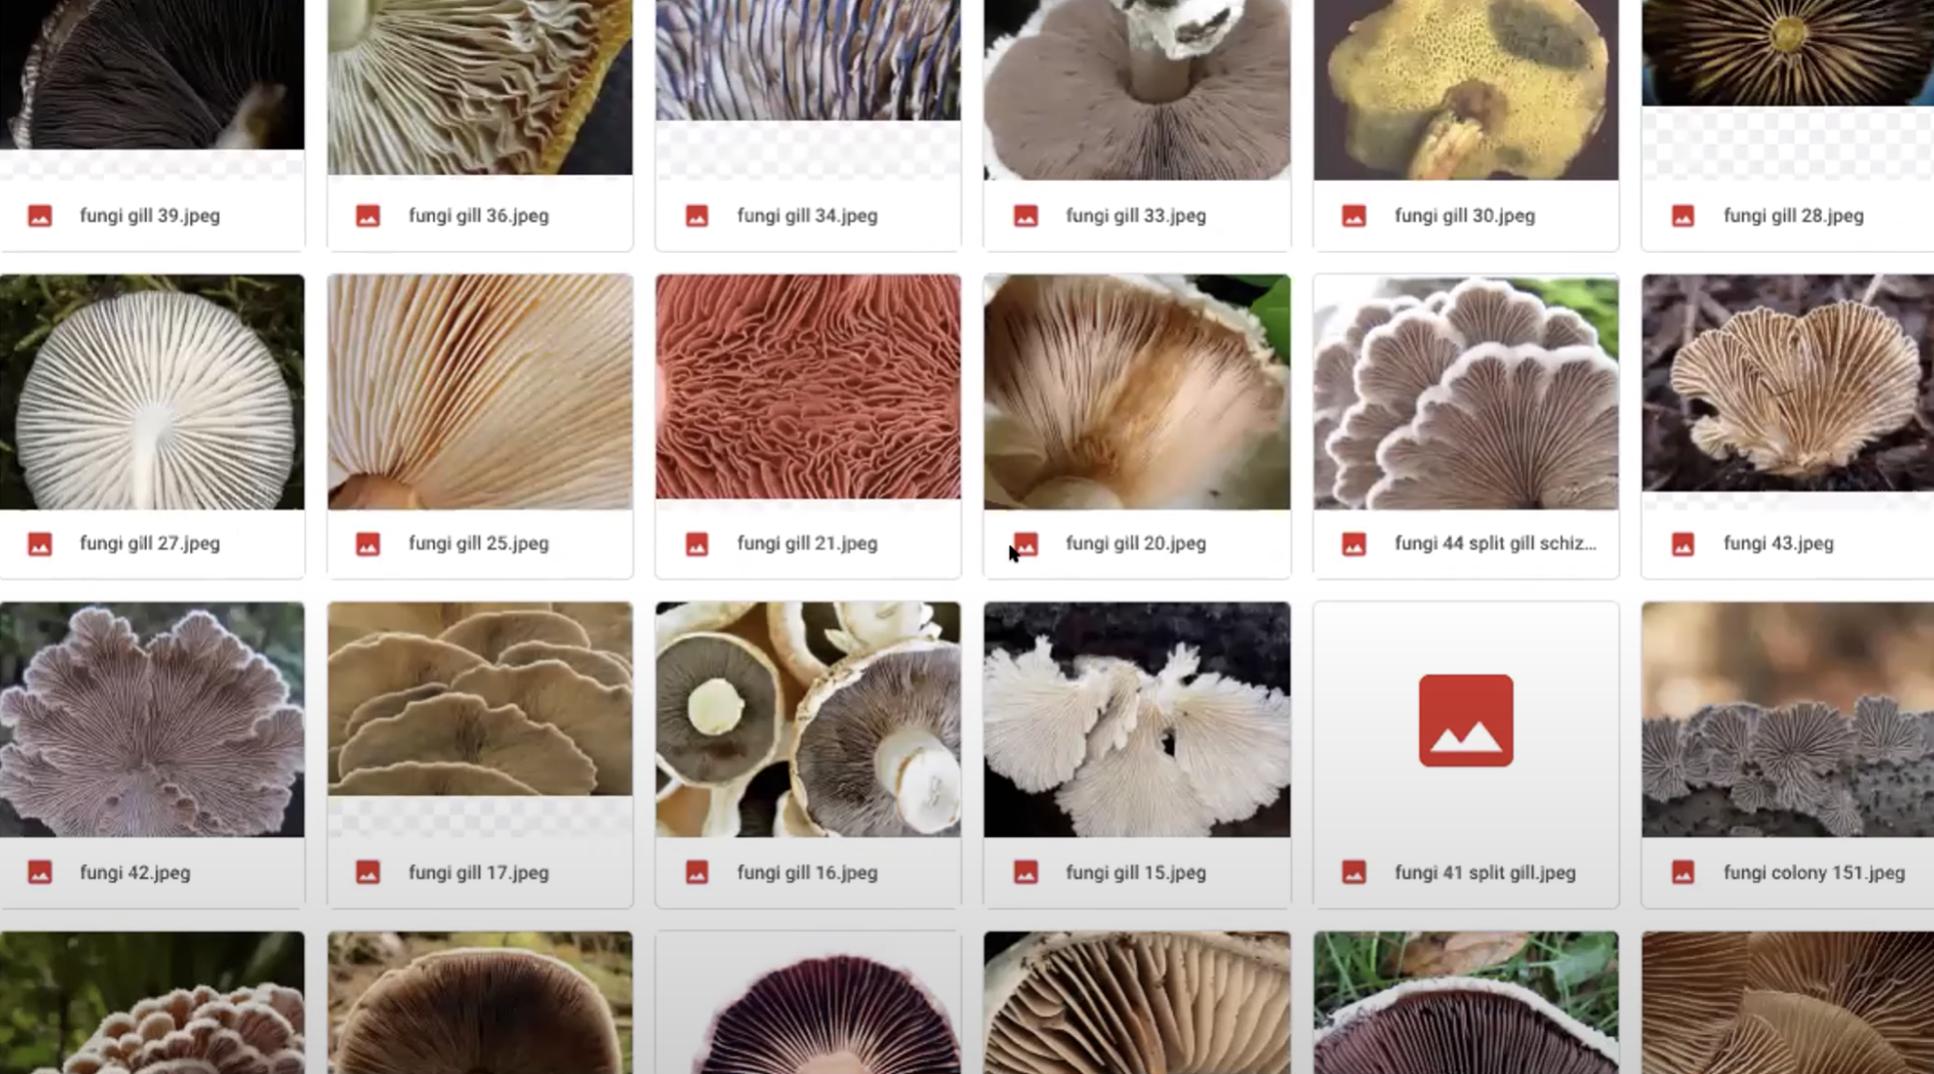 Thumbnails of a visually broad array of funghi, screenshotted from a Windows Explorer computer